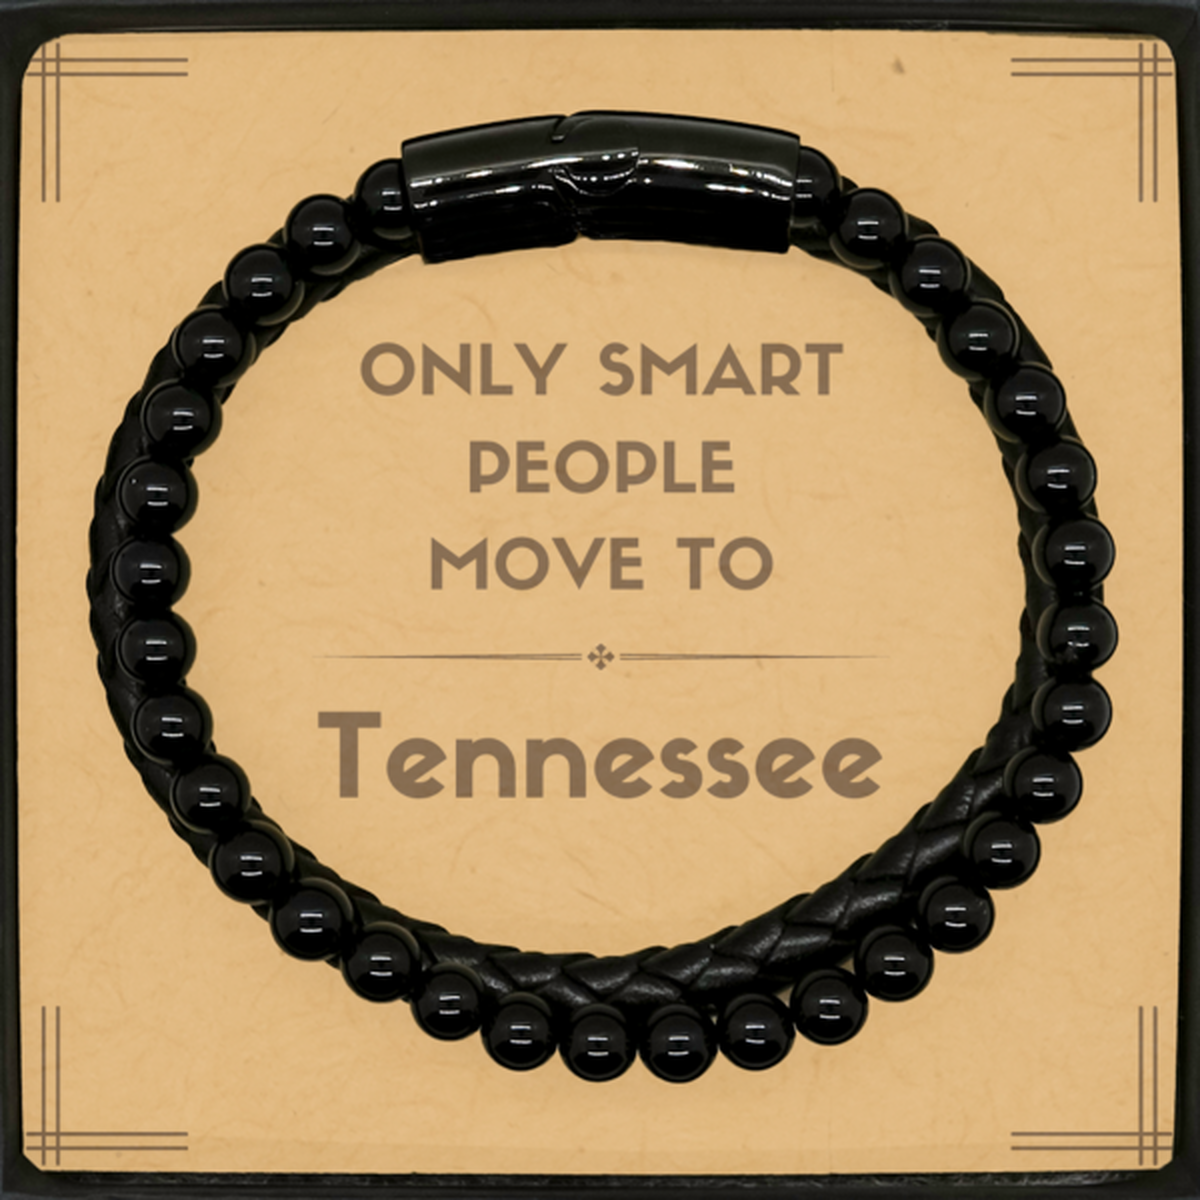 Only smart people move to Tennessee Stone Leather Bracelets, Message Card Gifts For Tennessee, Move to Tennessee Gifts for Friends Coworker Funny Saying Quote